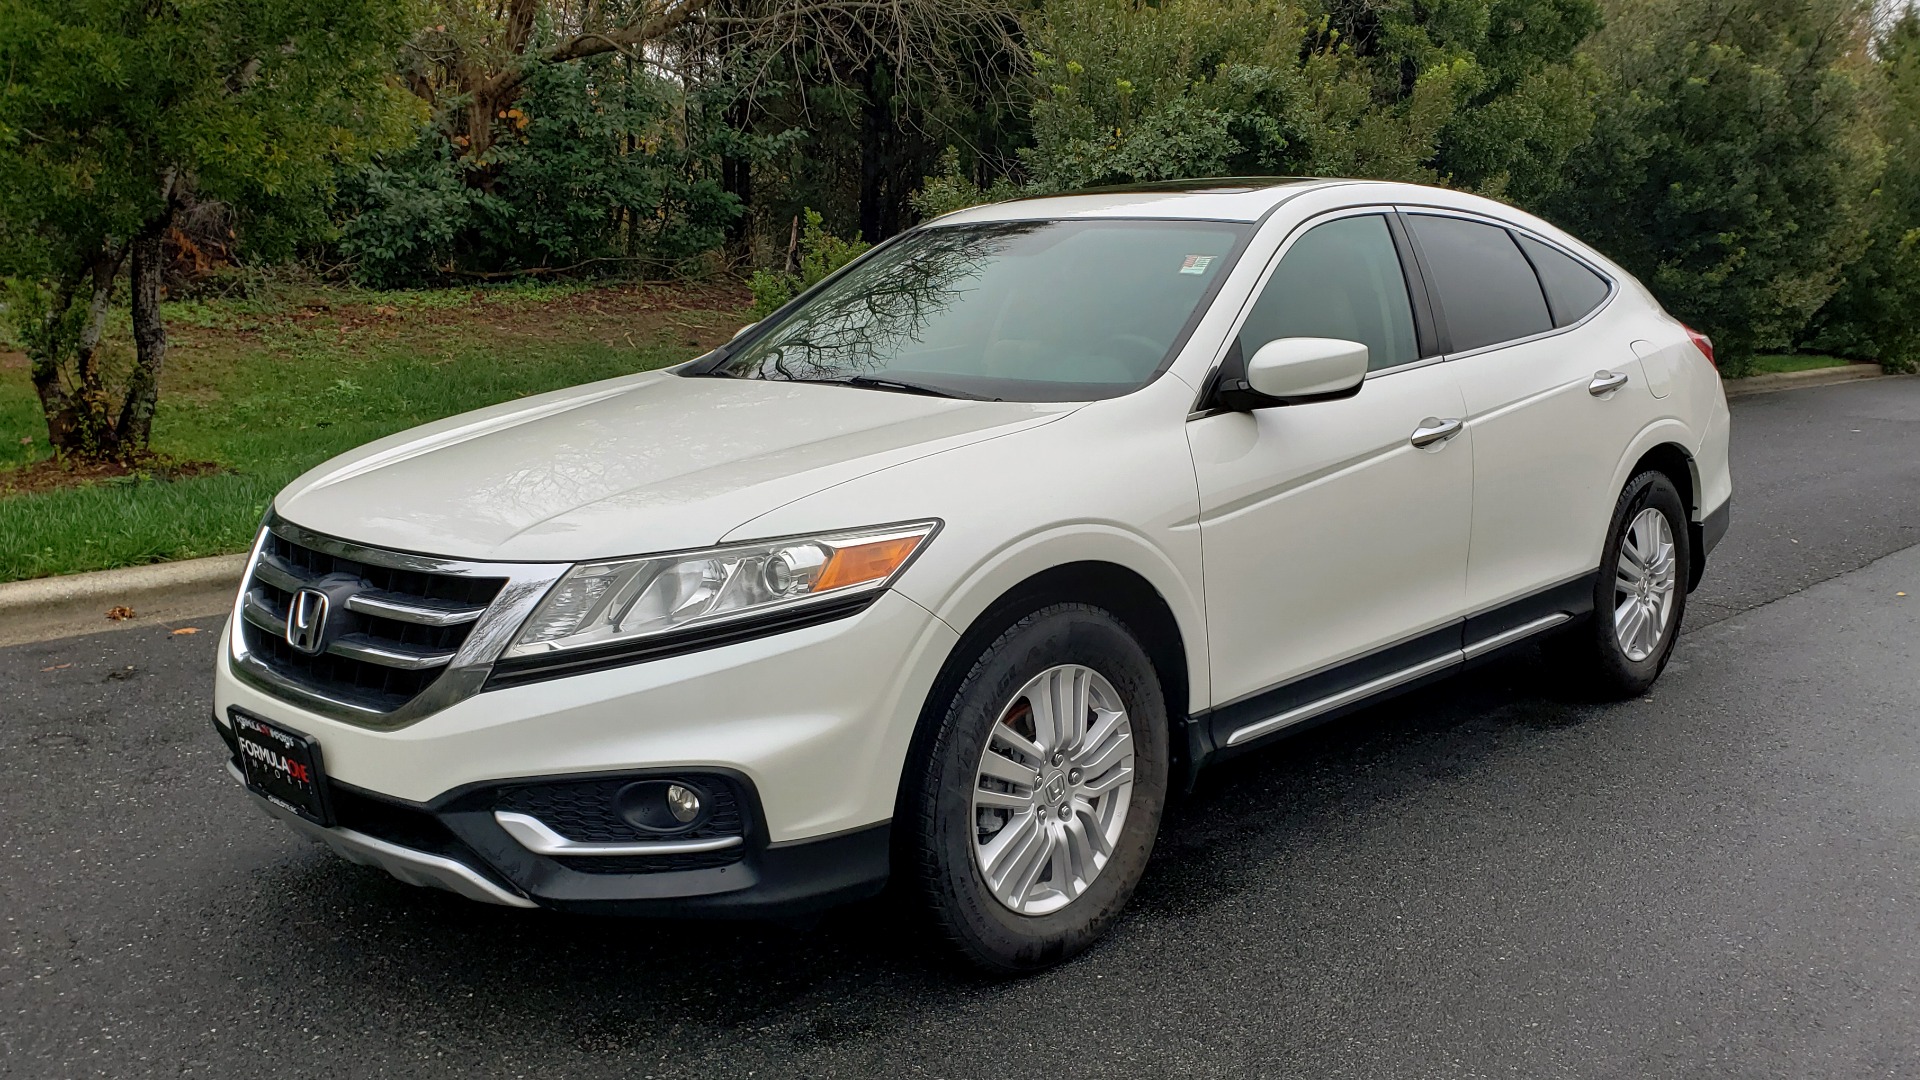 Used 2015 Honda CROSSTOUR EX-L 2WD / SUNROOF / REARVIEW / 17-IN ALLOY WHEELS for sale Sold at Formula Imports in Charlotte NC 28227 1